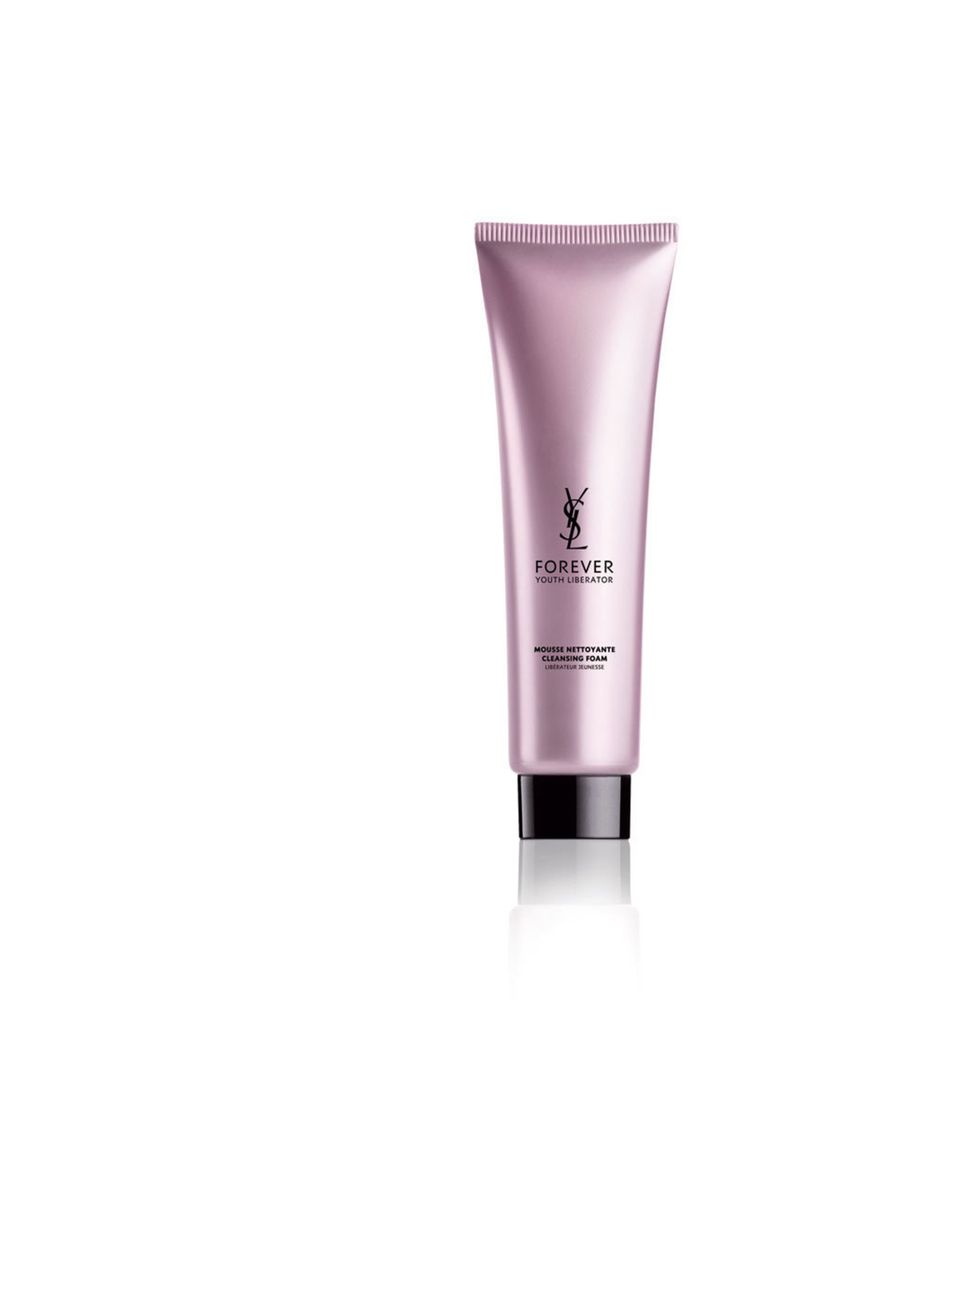 <p>A satisfyingly foamy, rich cleanser that wont leave your skin feeling stripped.</p><p><em><a href="http://www.yslbeauty.co.uk/skincare/features/whats-new/forever-youth-liberator-cleansing-foam-150ml.aspx">YSL</a> Forever Youth Liberator Cleansing Foam